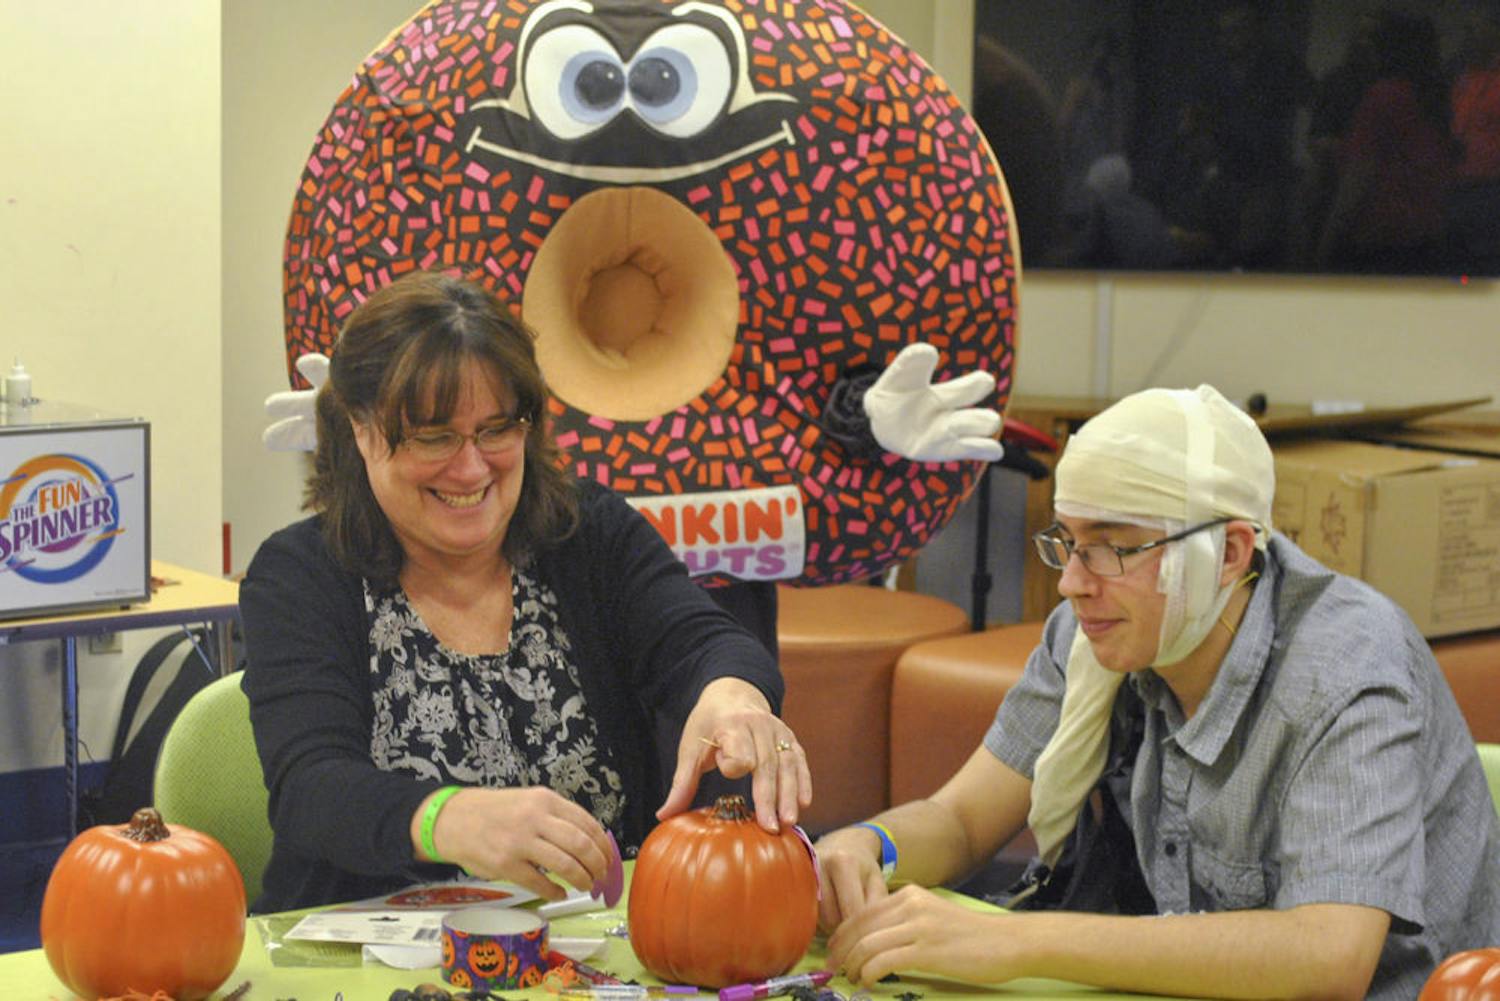 Andrew Weatherly (right), 17, decorates his plastic pumpkin with his mom while Sprinkles, the Dunkin’ Donuts mascot, poses.